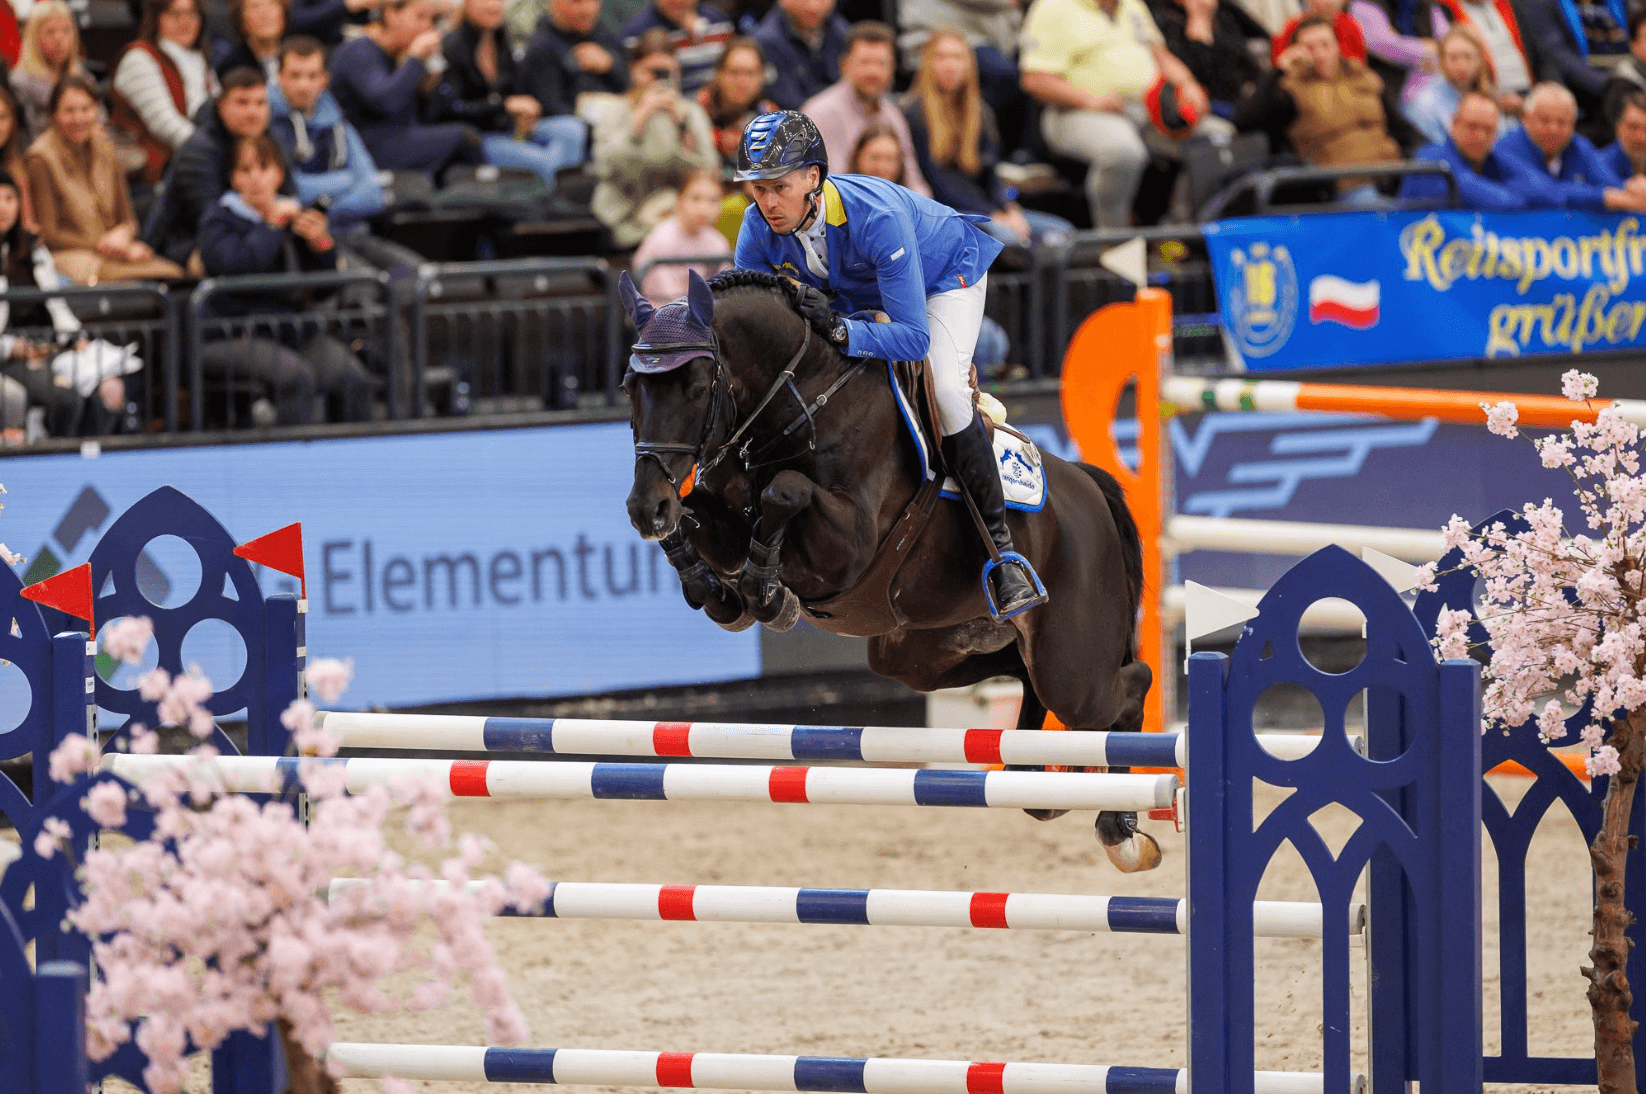 Christian Ahlmann keeps the victory in Germany winning the World Cup Qualification Class in Leipzig